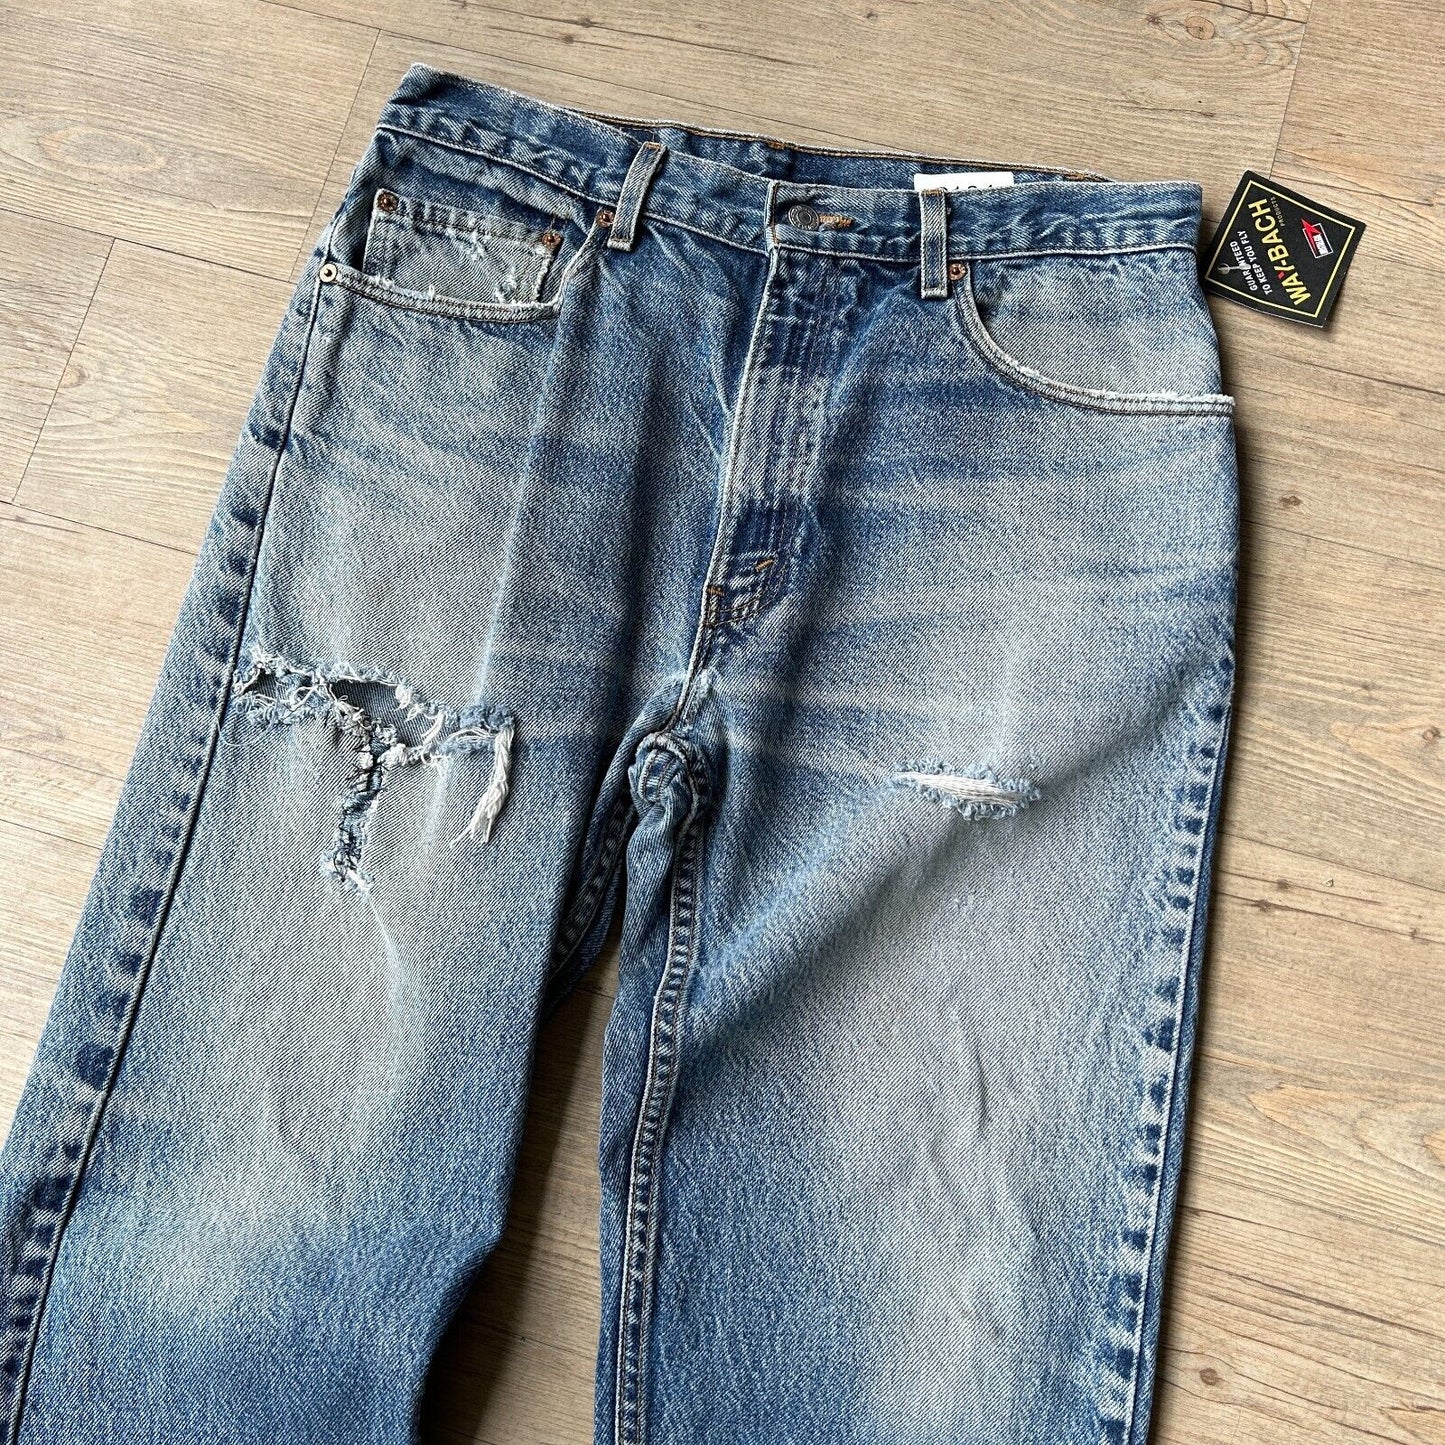 VINTAGE 90s | LEVIS 505 Faded Regular Fit Jeans Pants sz W33 L30 Made In USA